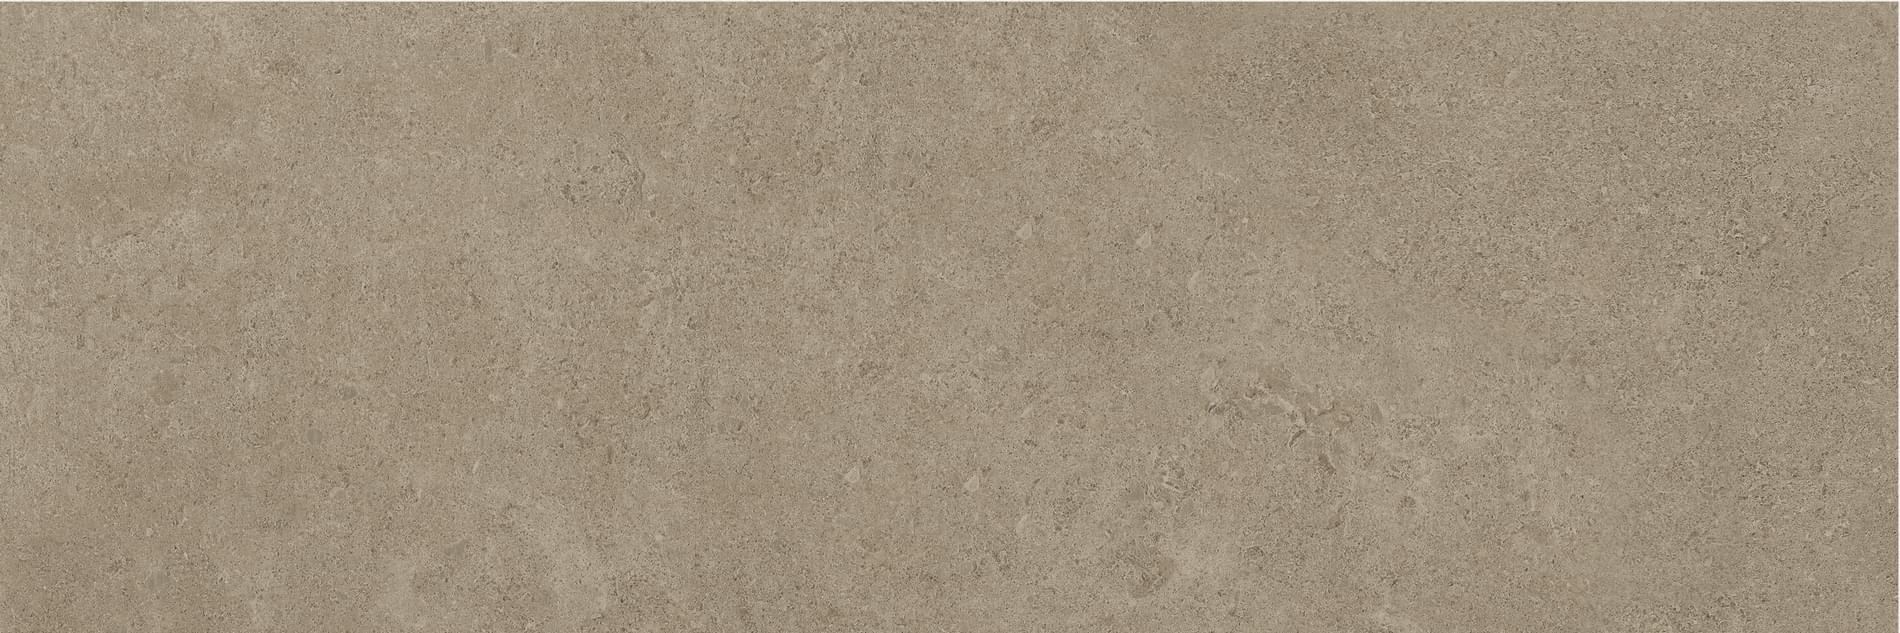 Baldocer Icon Taupe 30x90